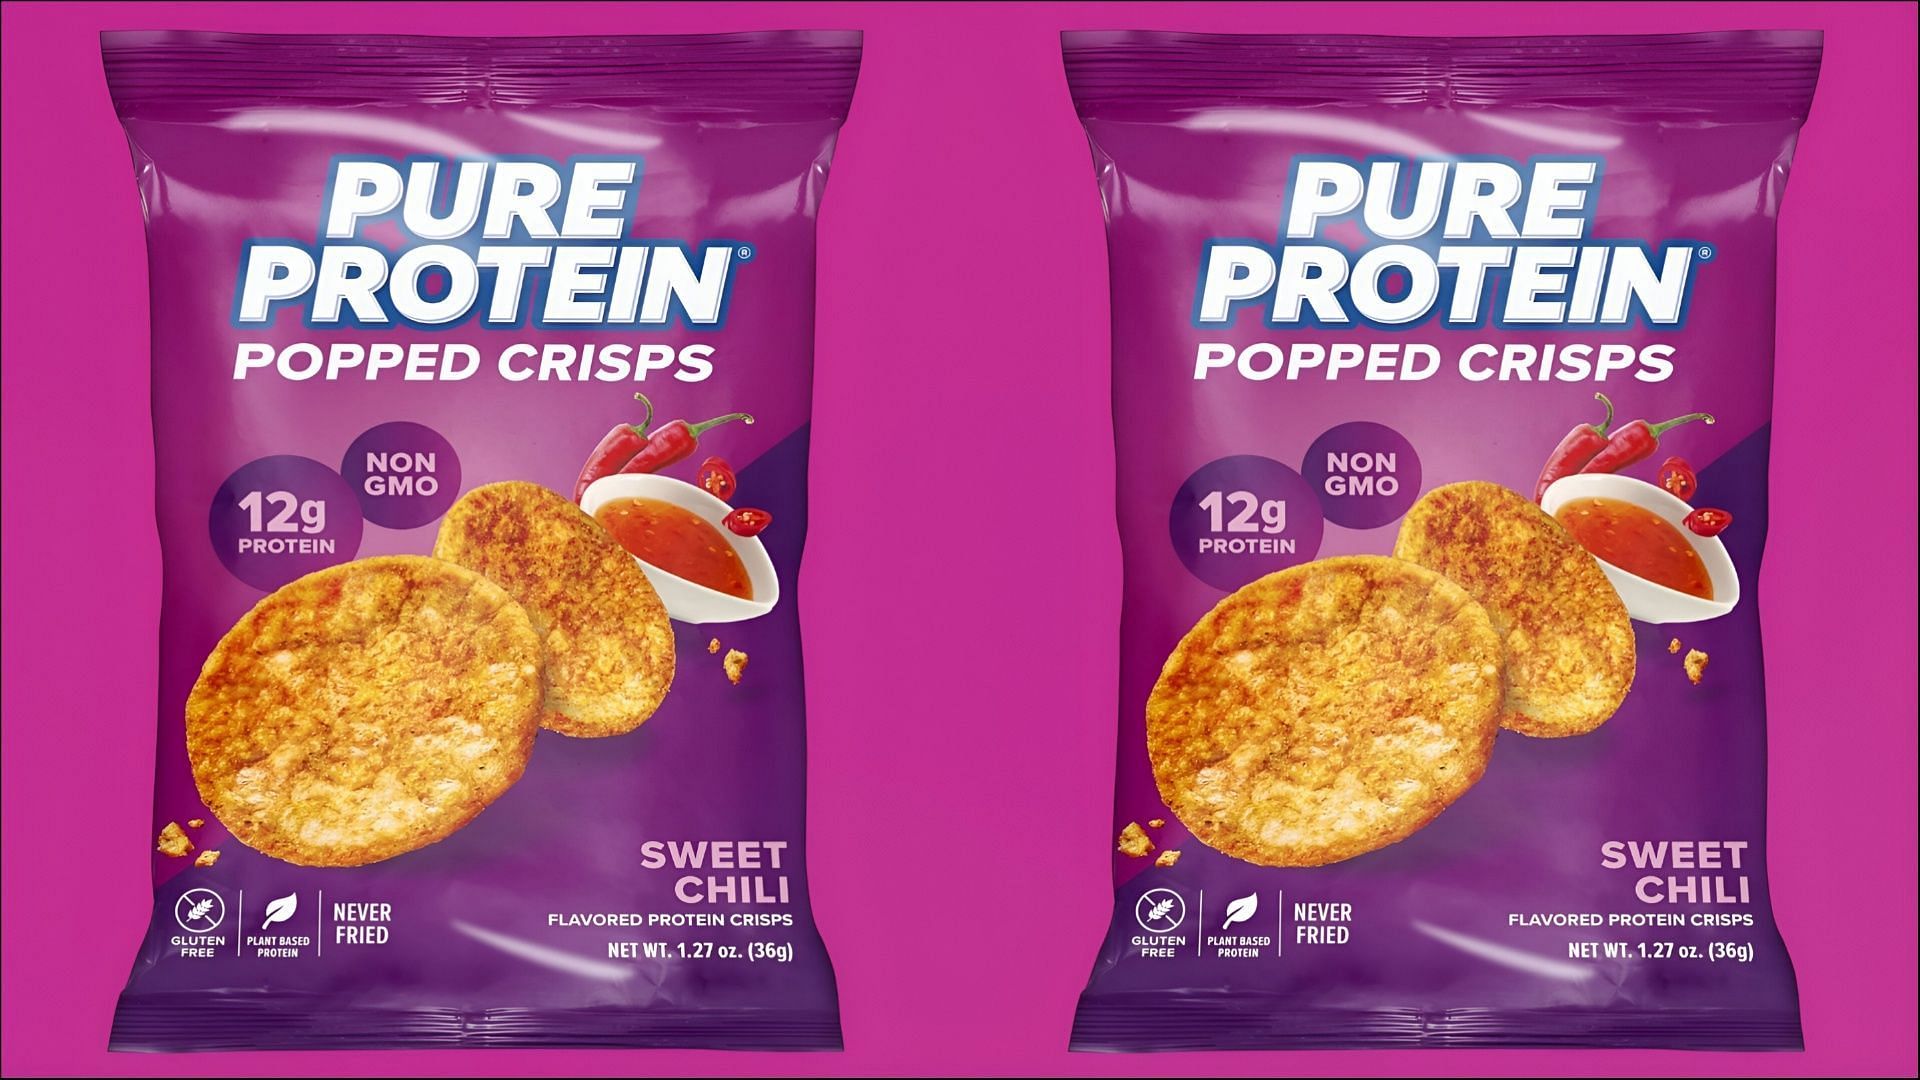 Pure Protein&#039;s new Sweet Chilli Popped Crisps are priced at over $1.83 each (Image via Amazon)